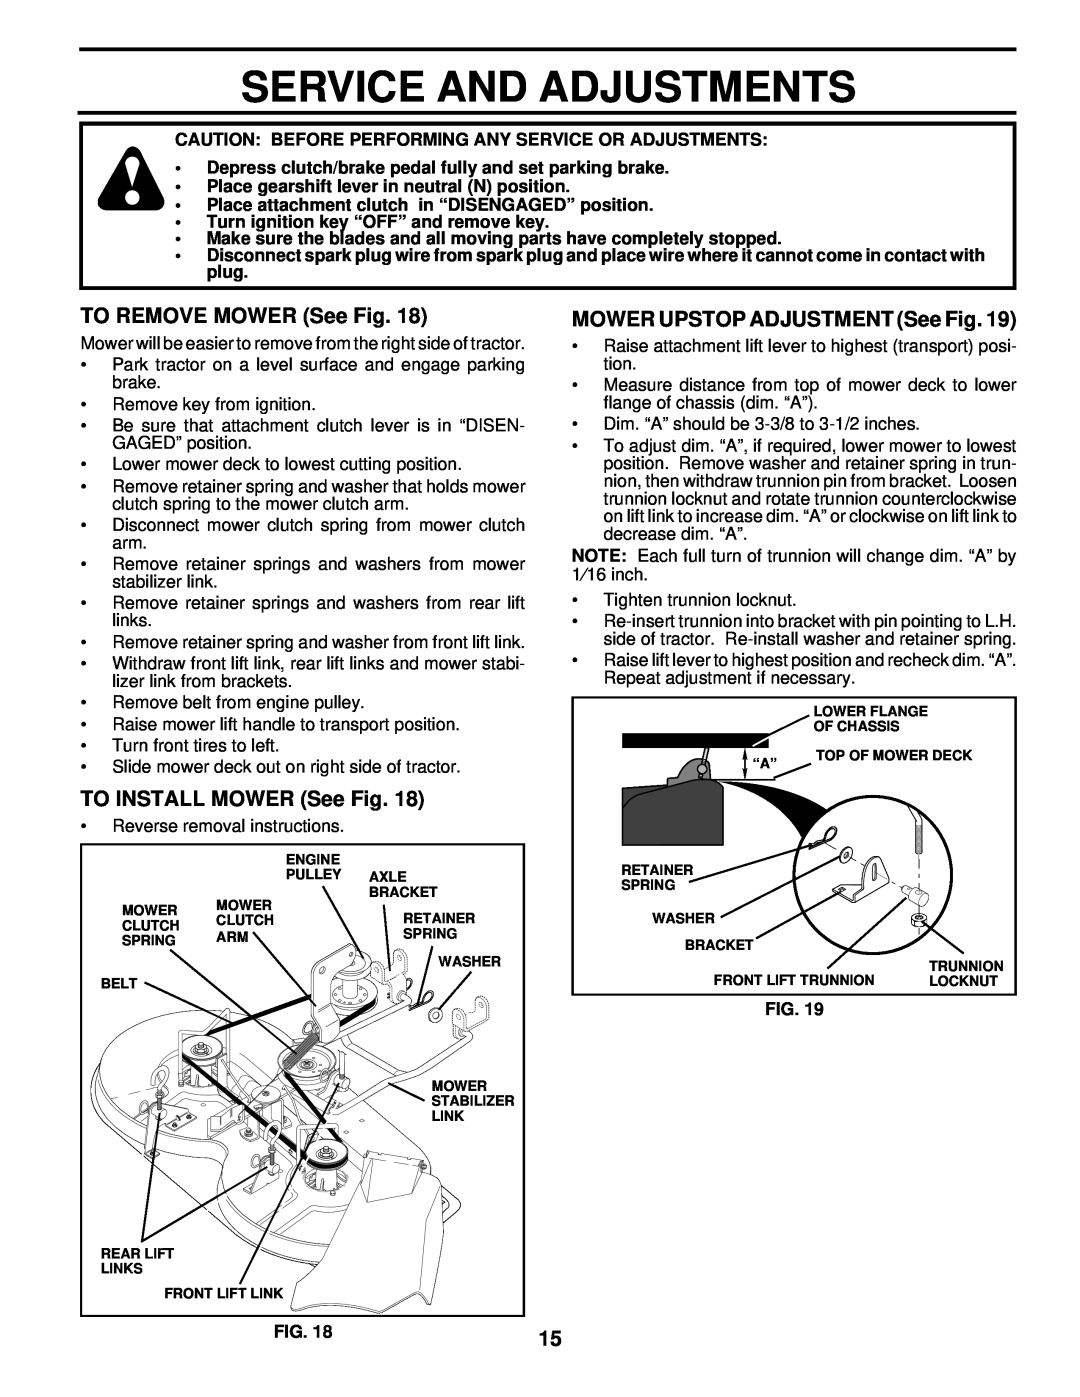 Husqvarna LR122 owner manual Service And Adjustments, TO REMOVE MOWER See Fig, TO INSTALL MOWER See Fig 